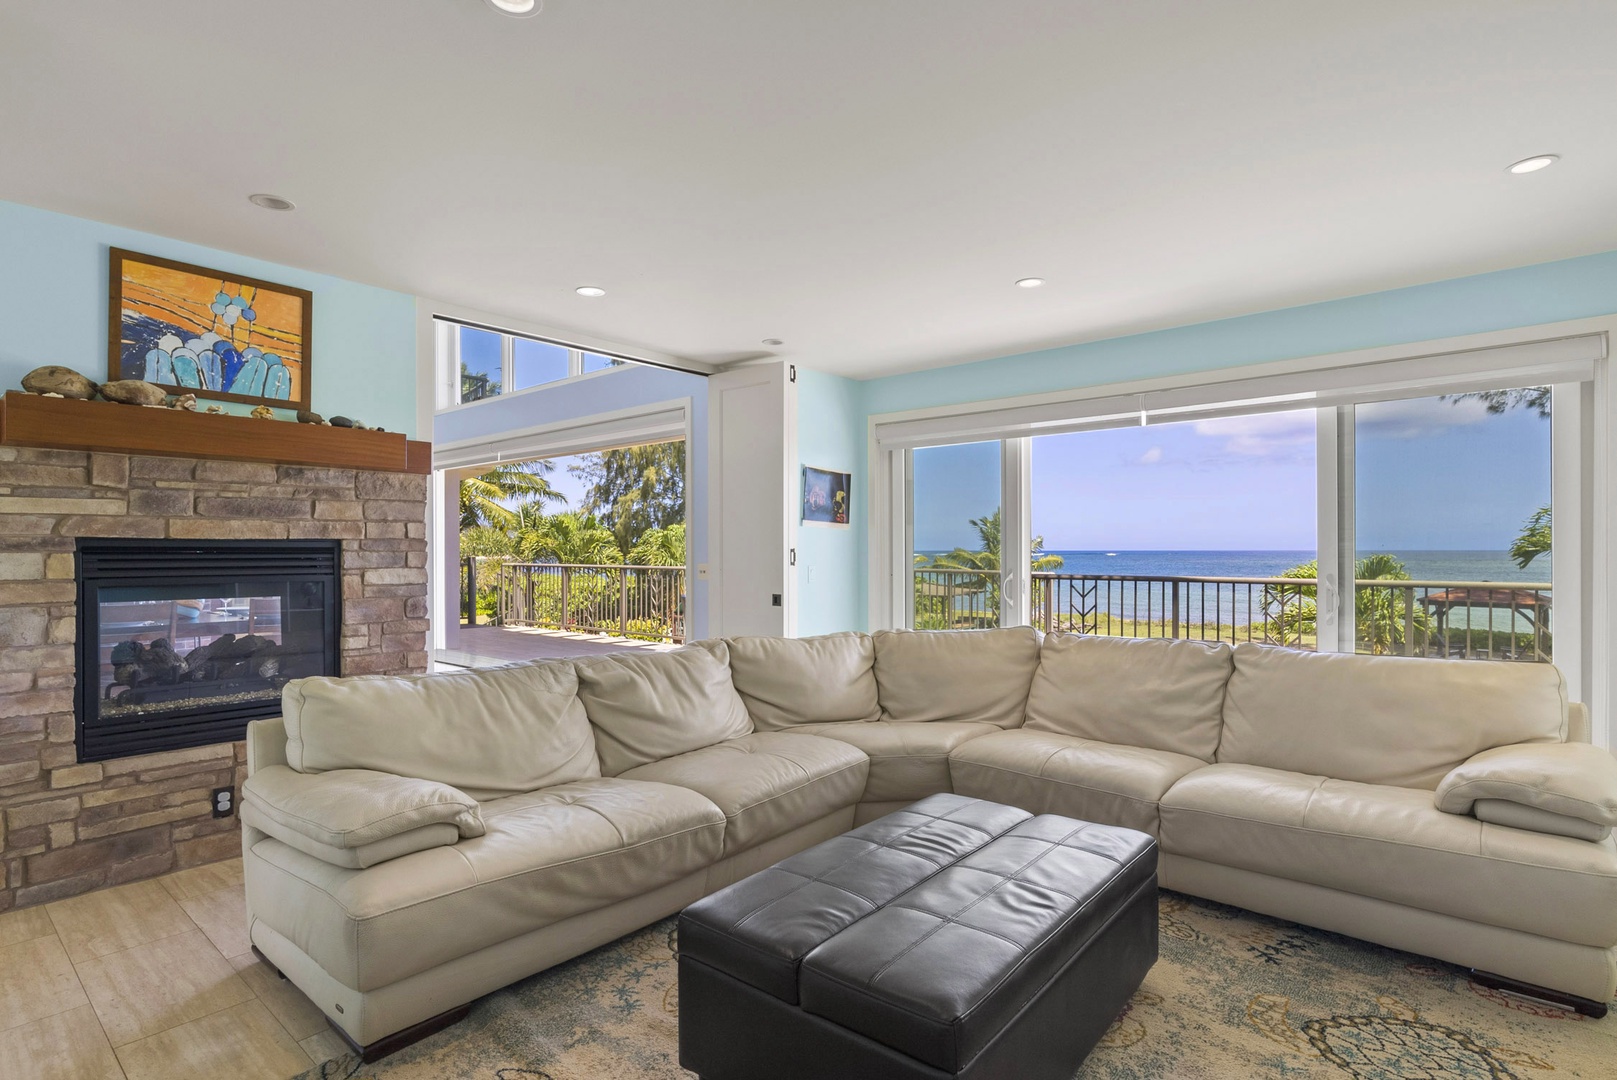 Waialua Vacation Rentals, Waialua Beachfront Estate - Amenities such as wireless internet, cable, a DVD player and DVD library, a stereo, a washer and dryer, and a dedicated kids' playroom ensure total guest comfort throughout your stay.